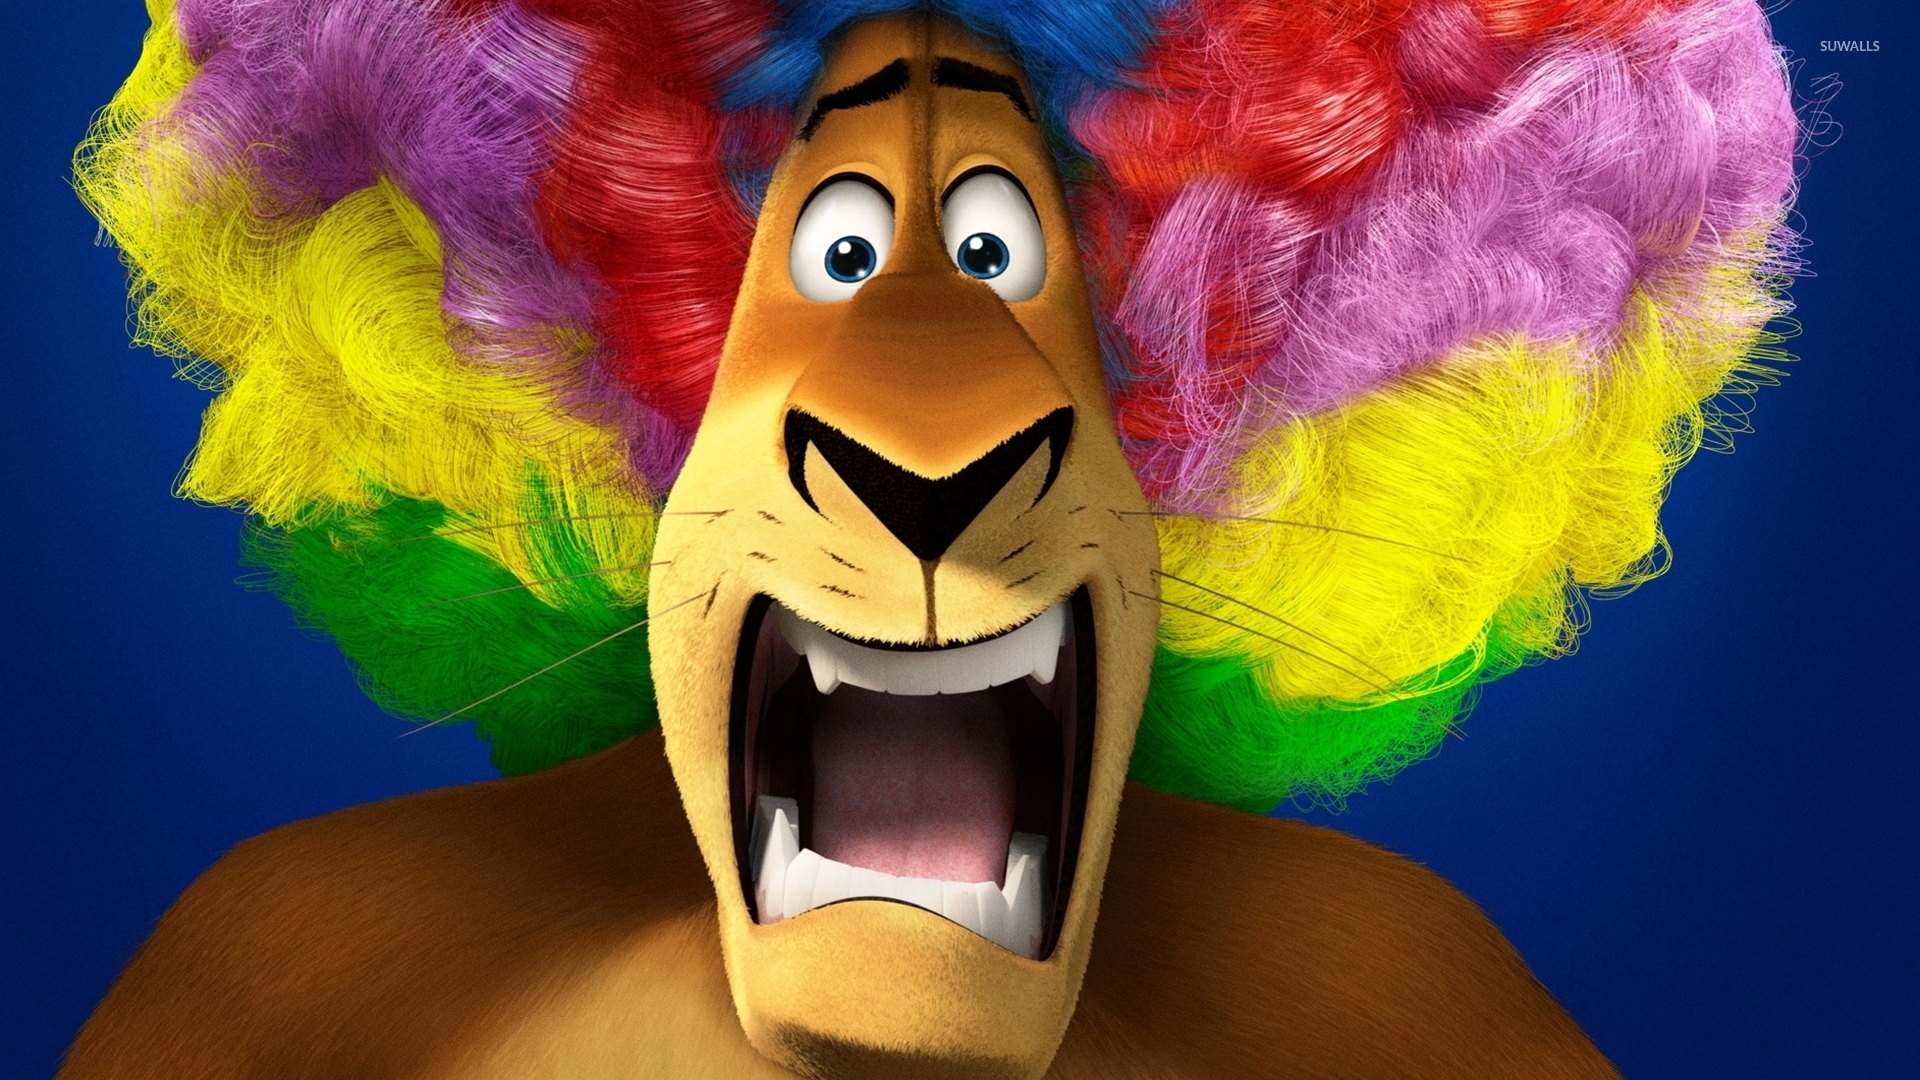 Alex - Madagascar 3: Europe's Most Wanted [2] wallpaper - Cartoon wallpapers  - #45994